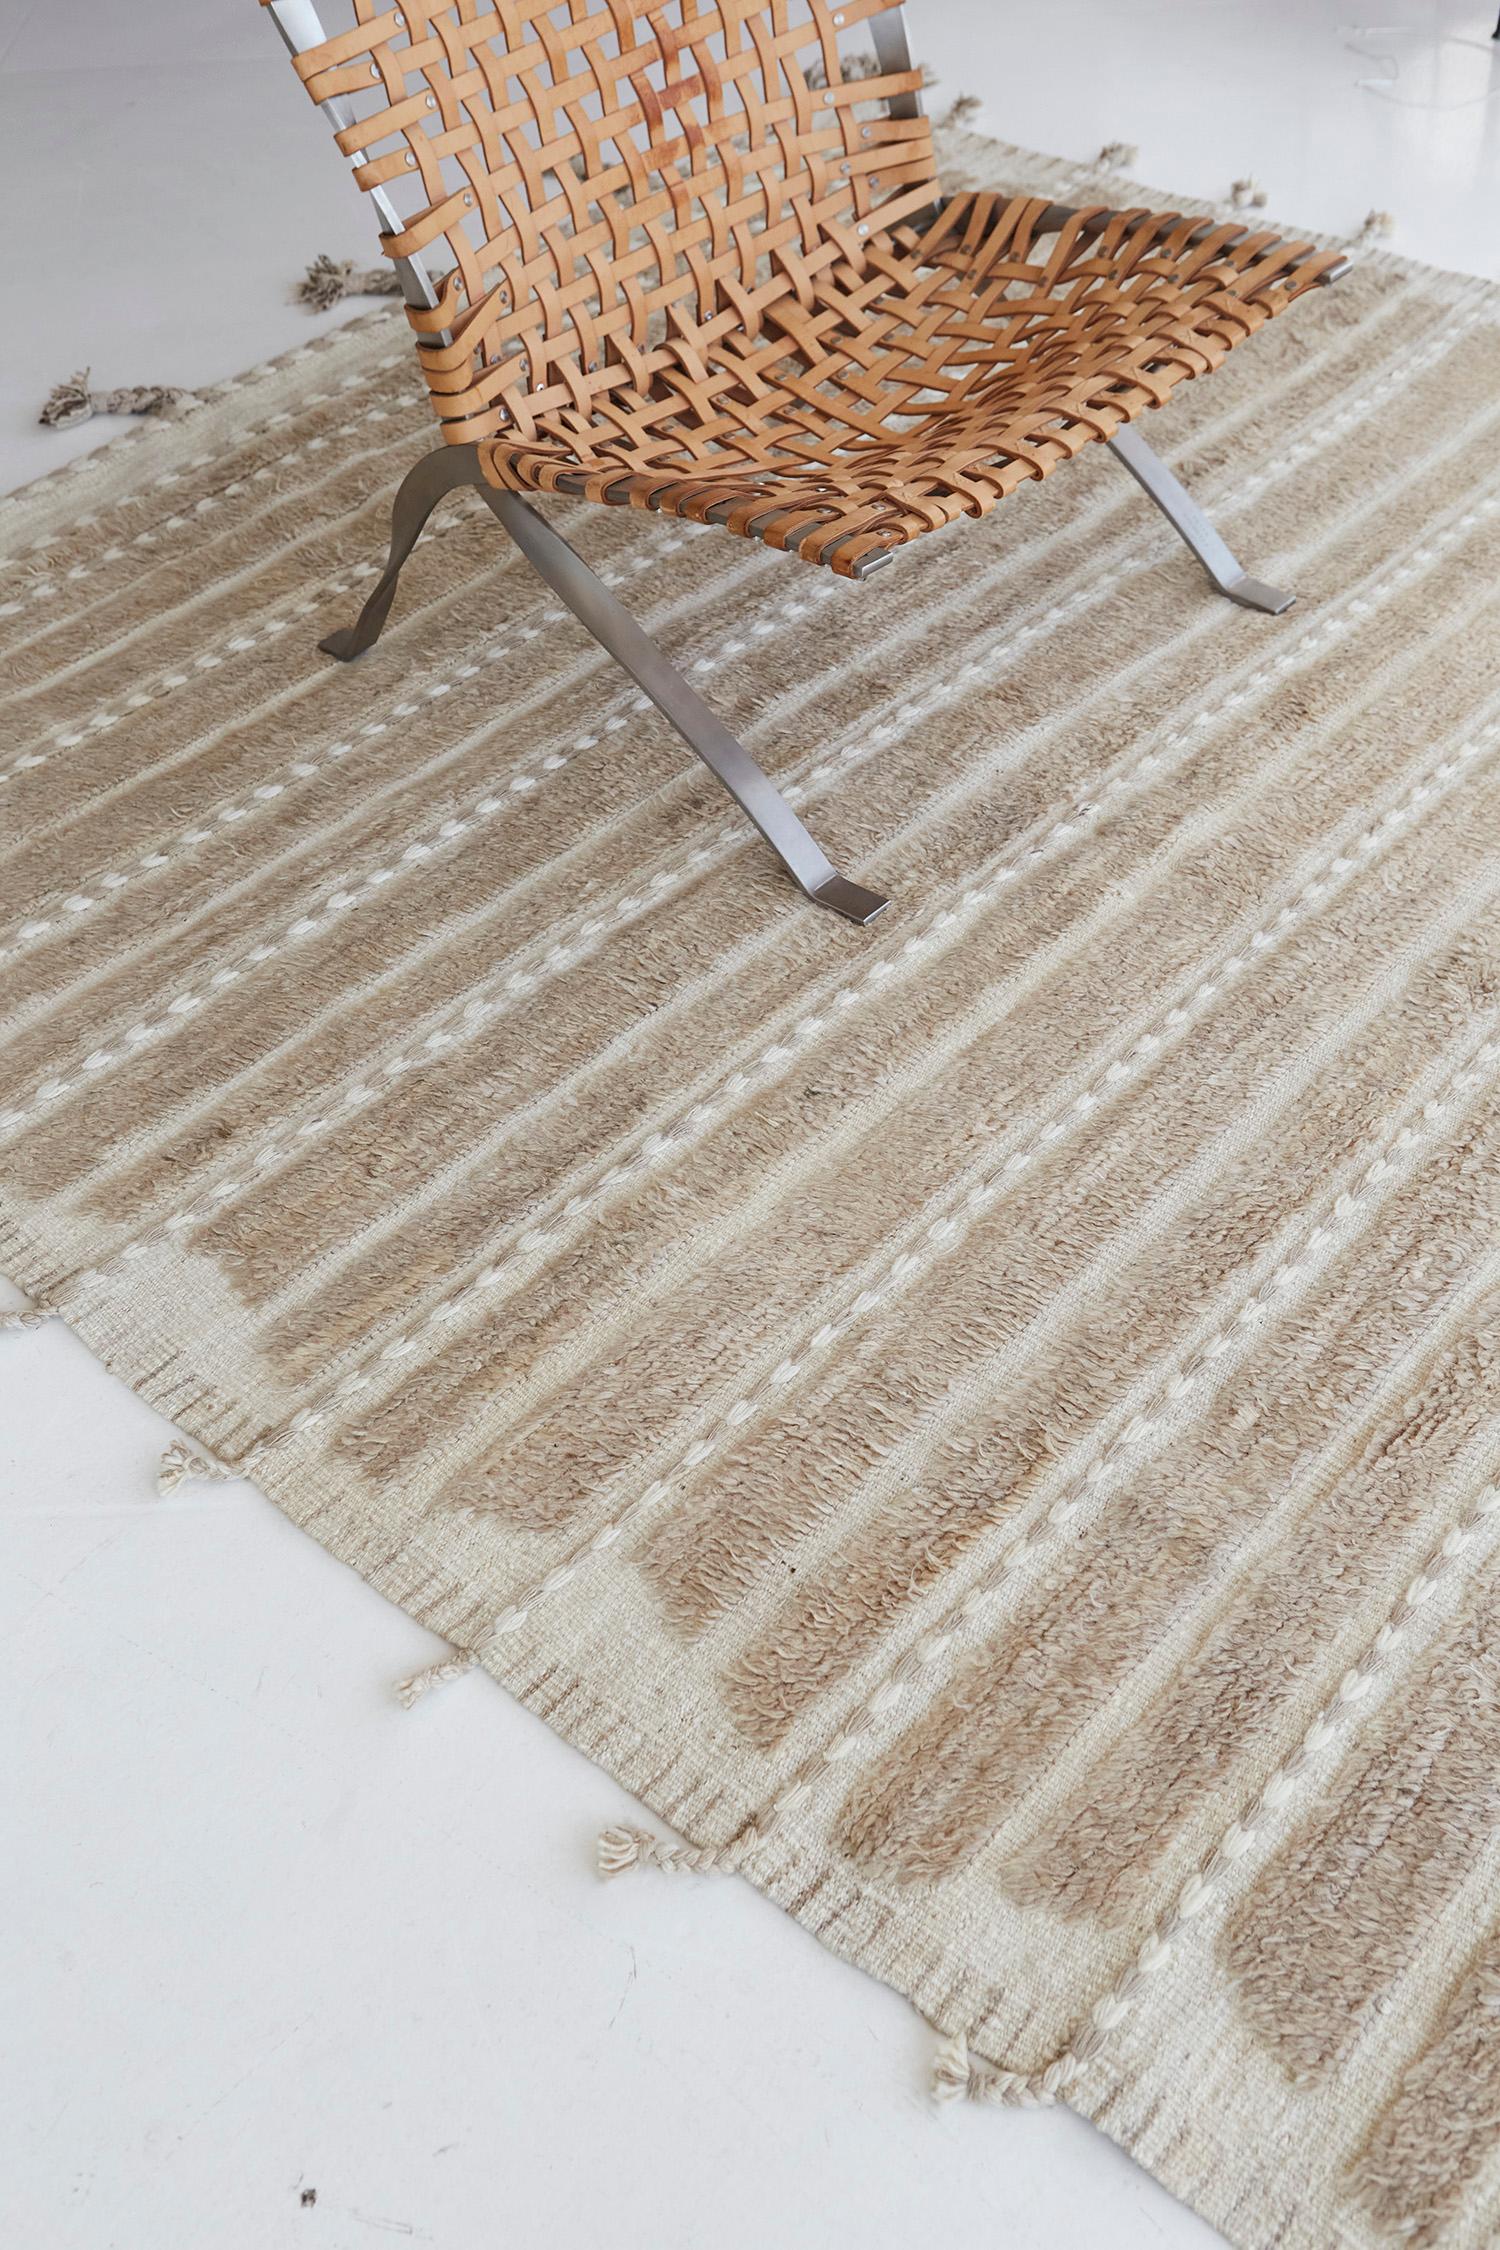 Abrolhos is a handwoven luxurious wool rug with timeless embossed detailing. In addition to its muted brown flatweave, Albrohos has a beautiful shag that brings a lustrous texture and contemporary feel to one's space. The Haute Bohemian collection